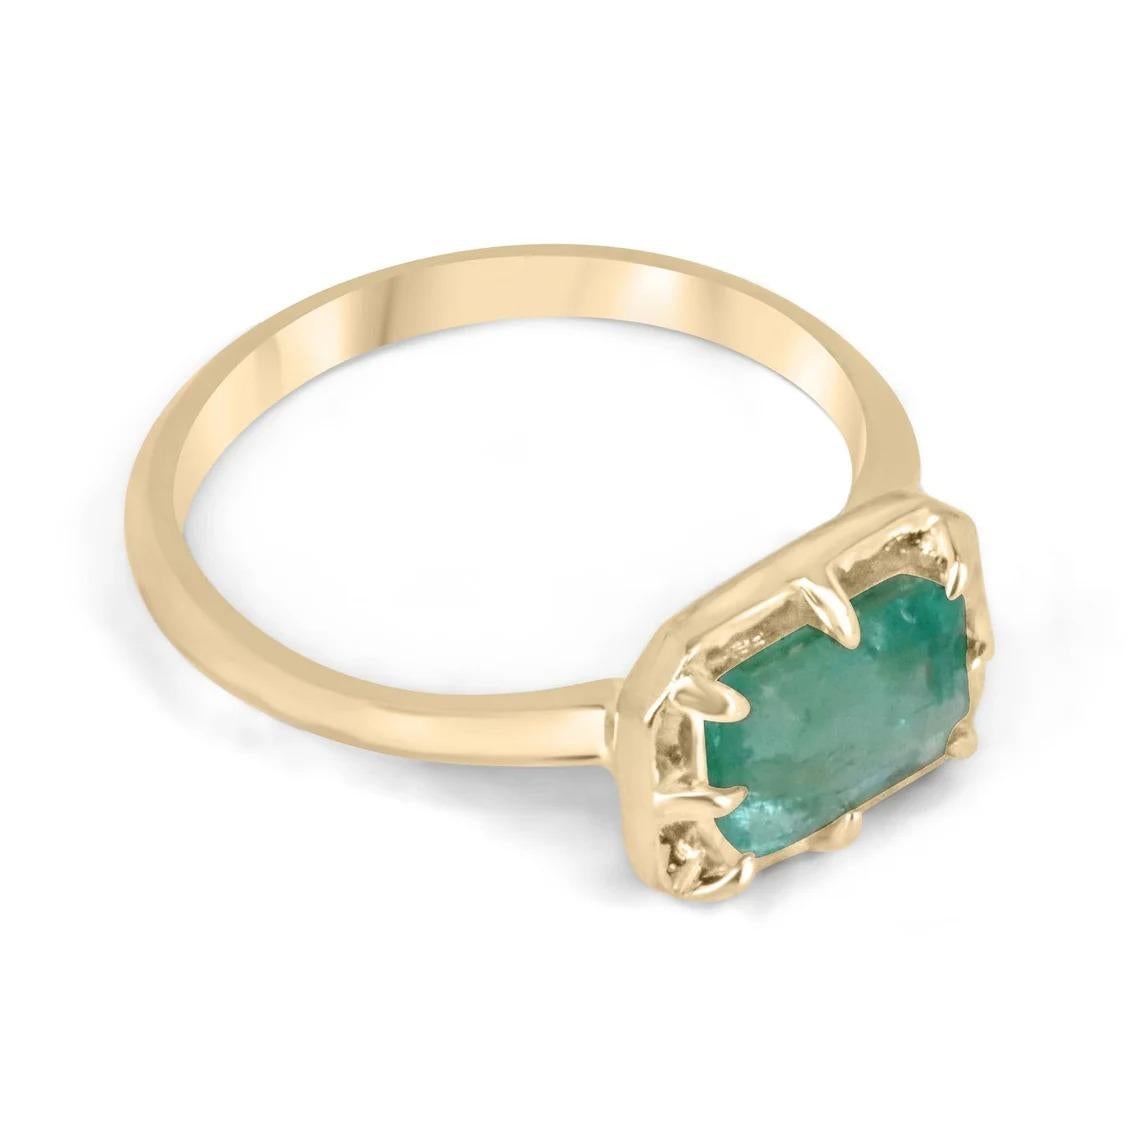 Introducing a captivating solitaire emerald ring that exudes charm and grace. This stunning piece features an approximate 1.75-carat natural emerald cut emerald, delicately set east to west in an elegant 8 prong setting. The emerald boasts a